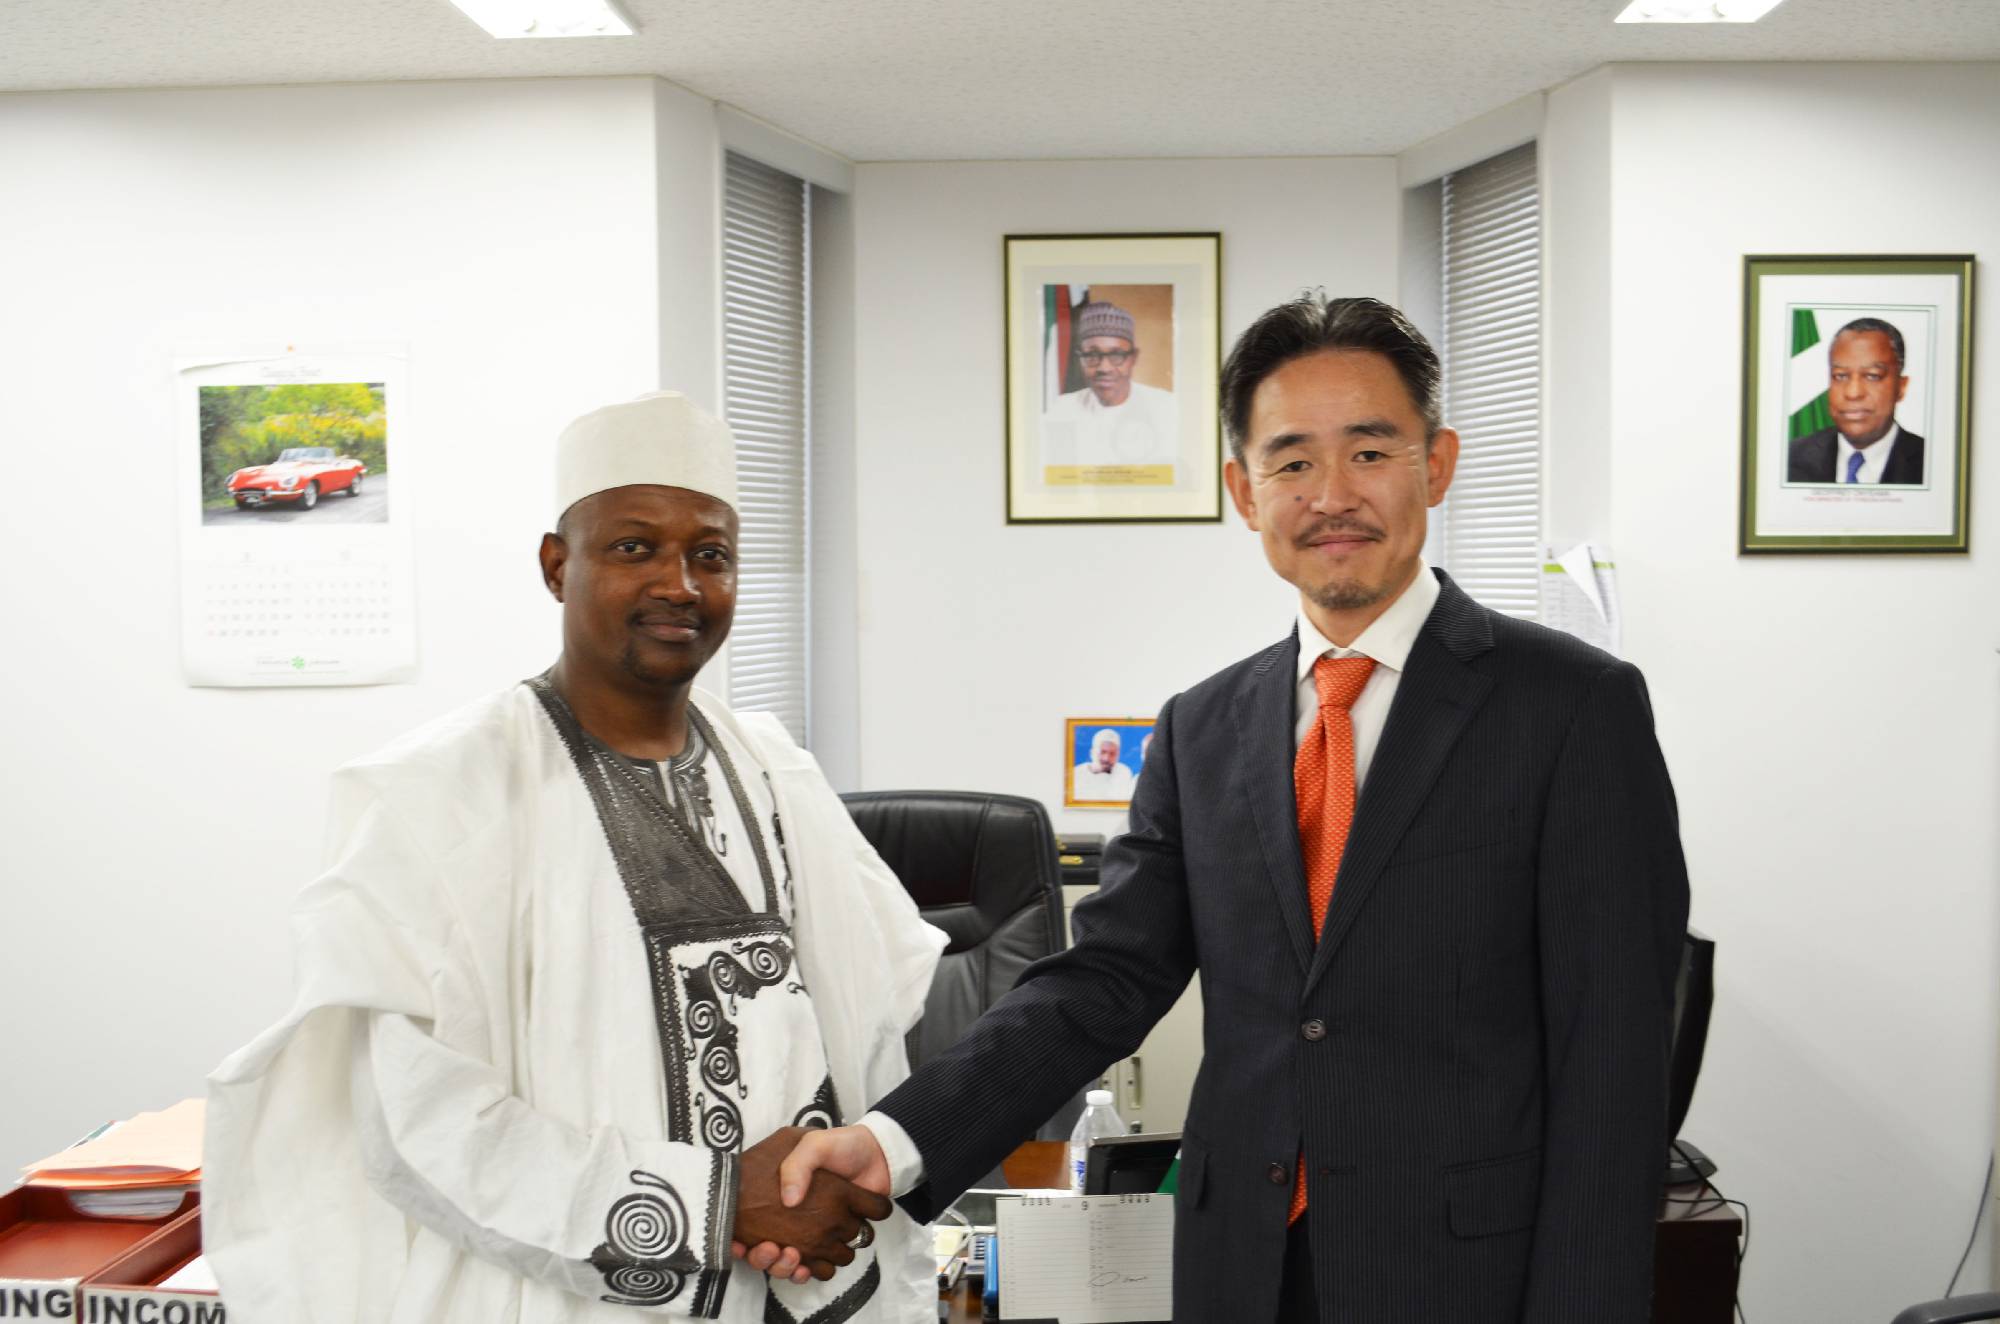 Mr. Husseini, Chargé d'Affaires a.i. and Mr. Ito, Chairman of Taiyo Industry Africa Inc.